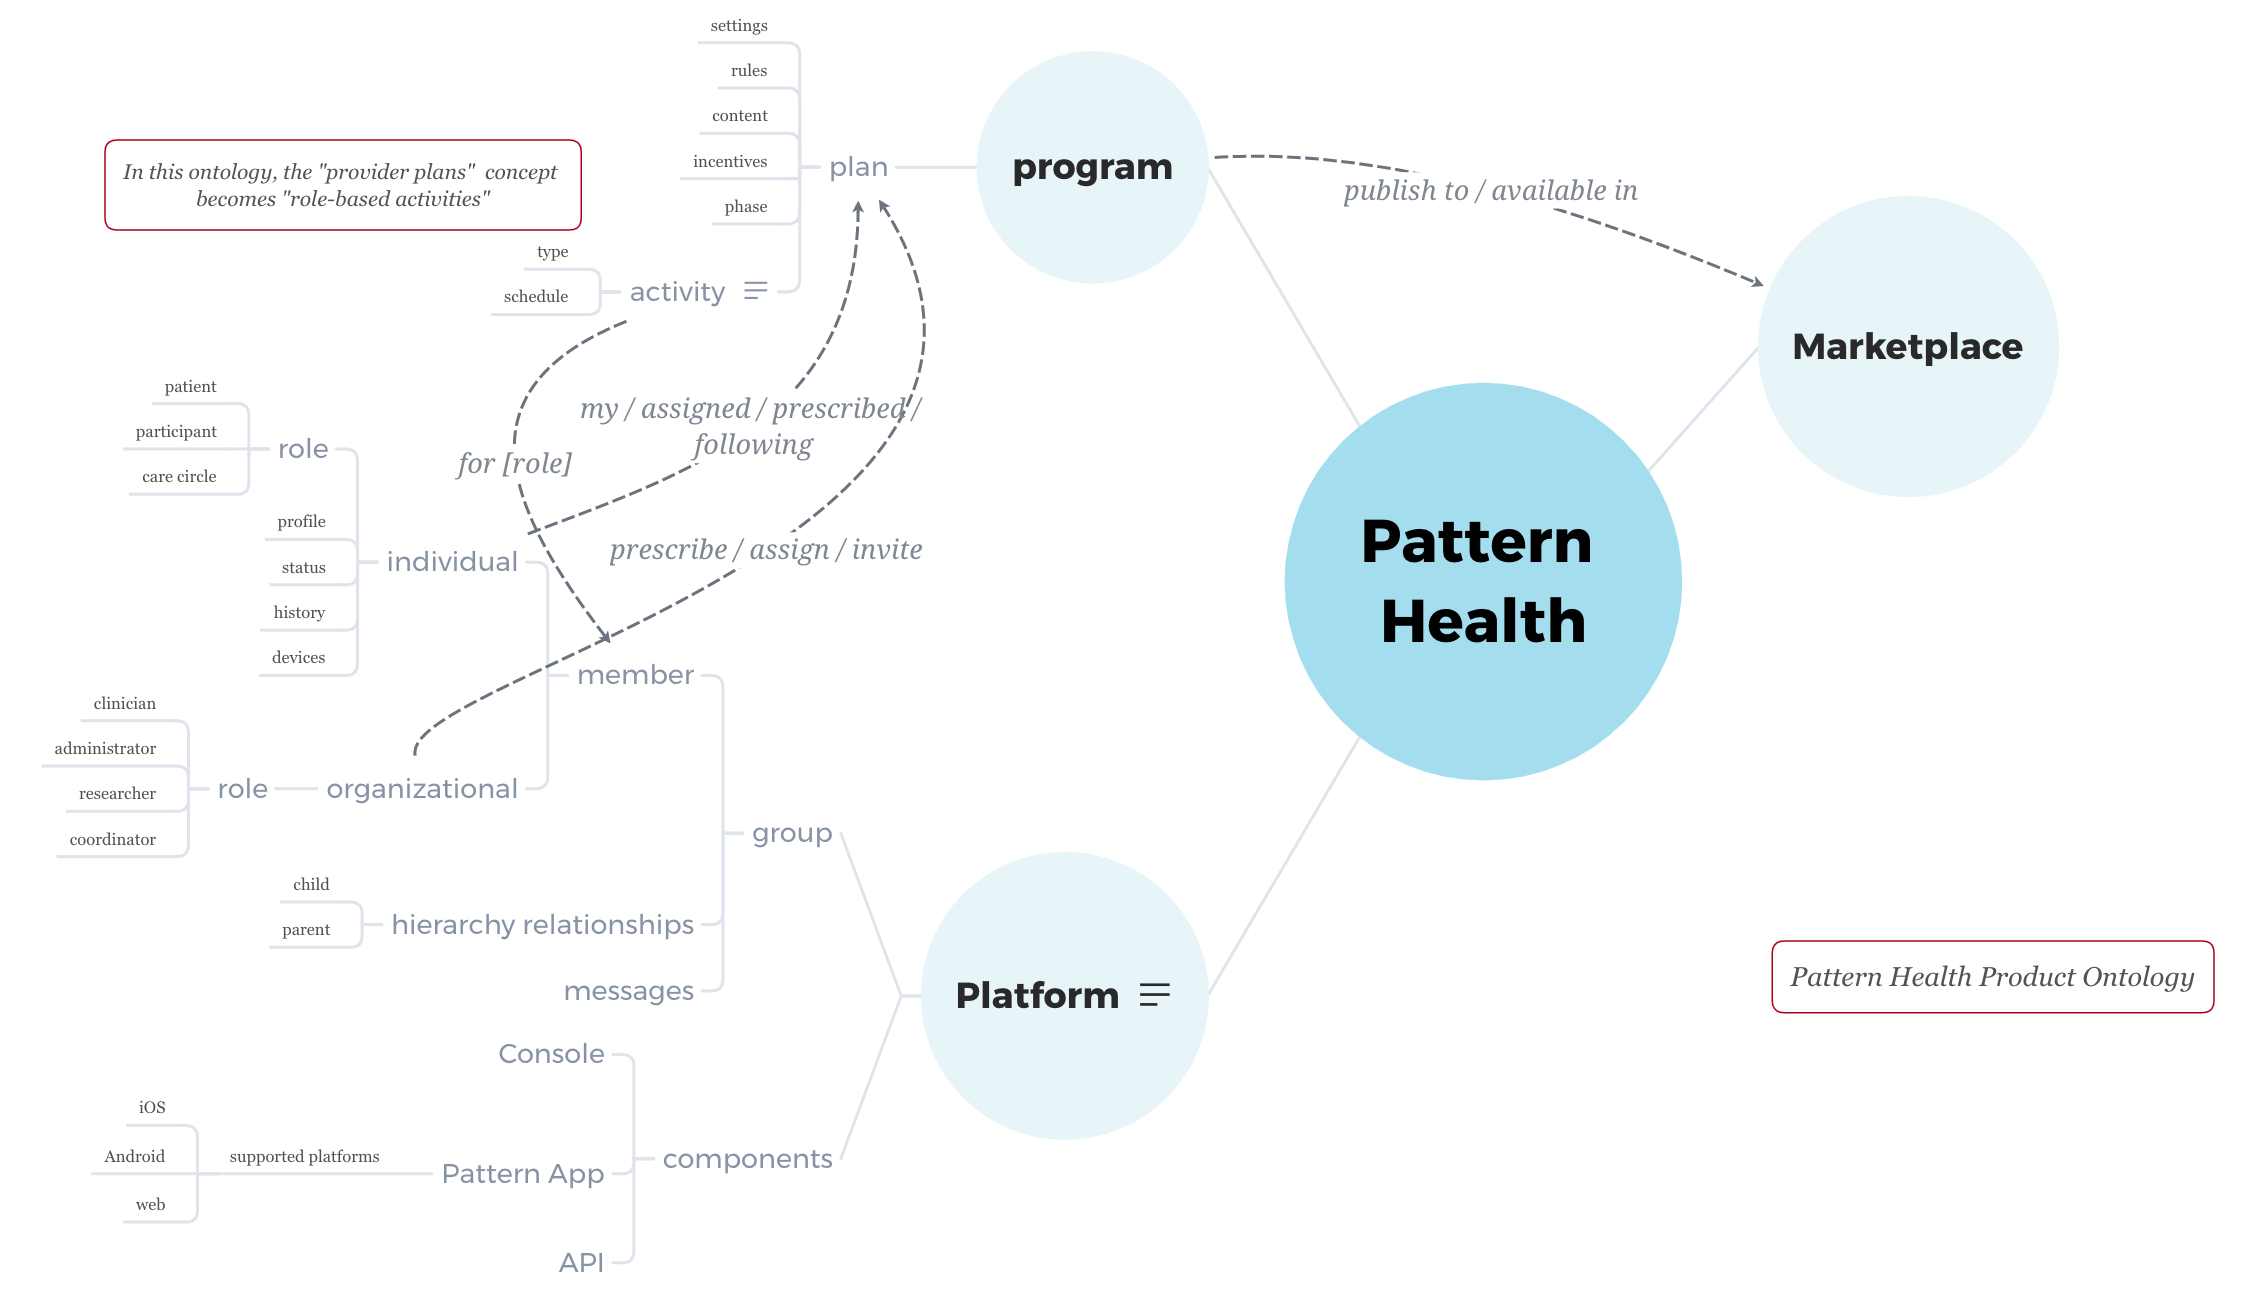 pattern-health-product-ontology.png